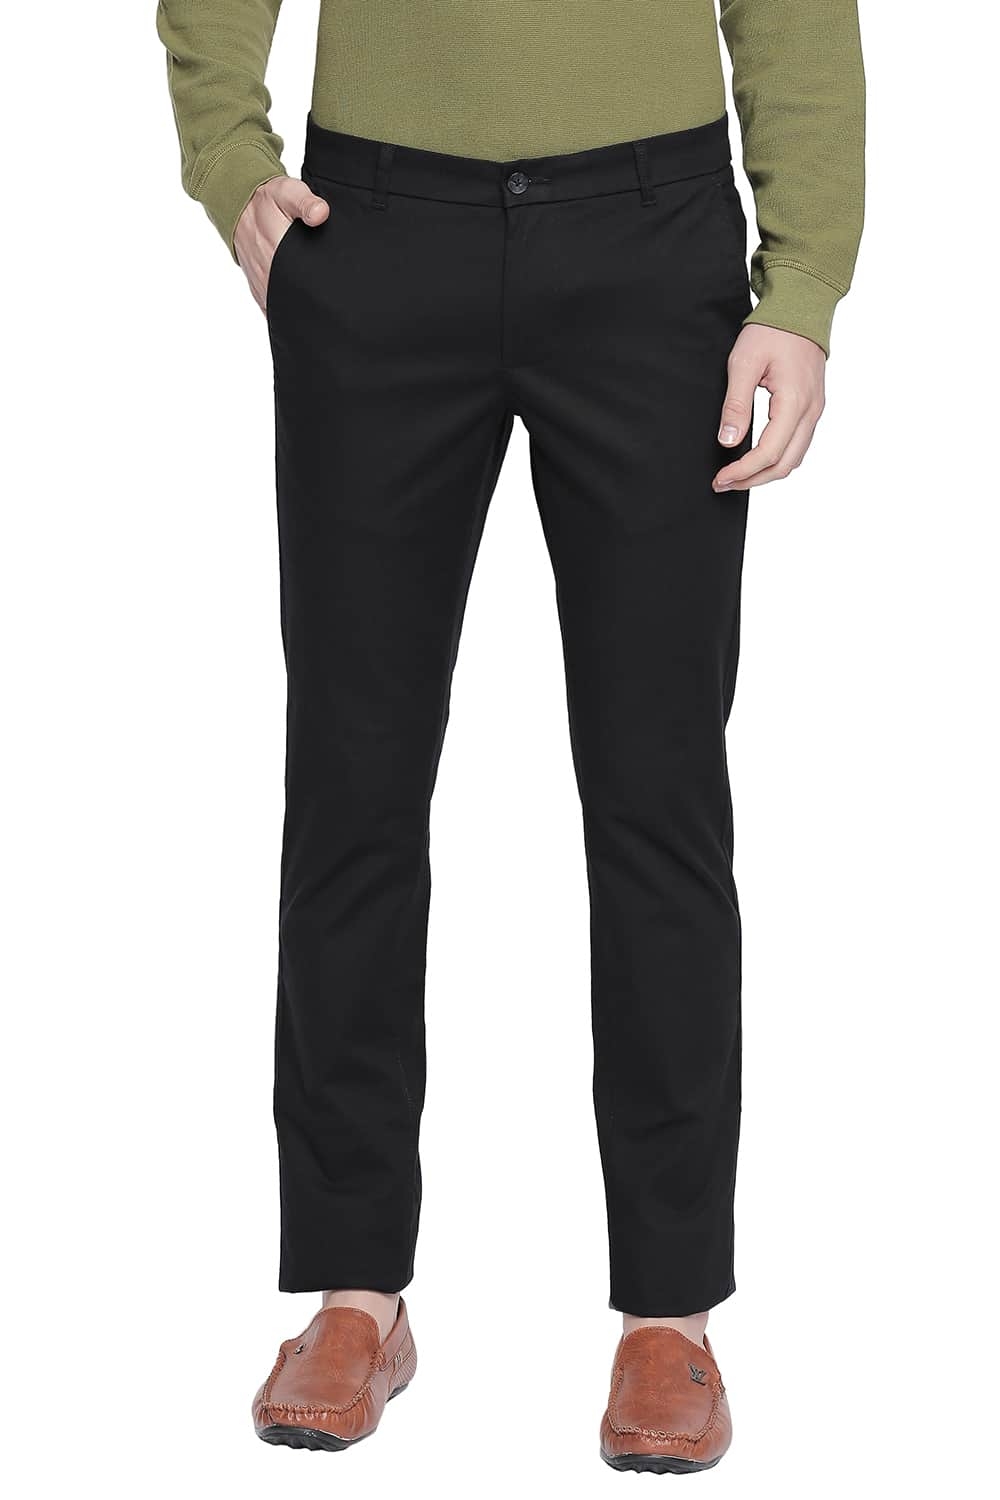 Basics | Basics Tapered Fit Stretch Limo Stretch Trouser